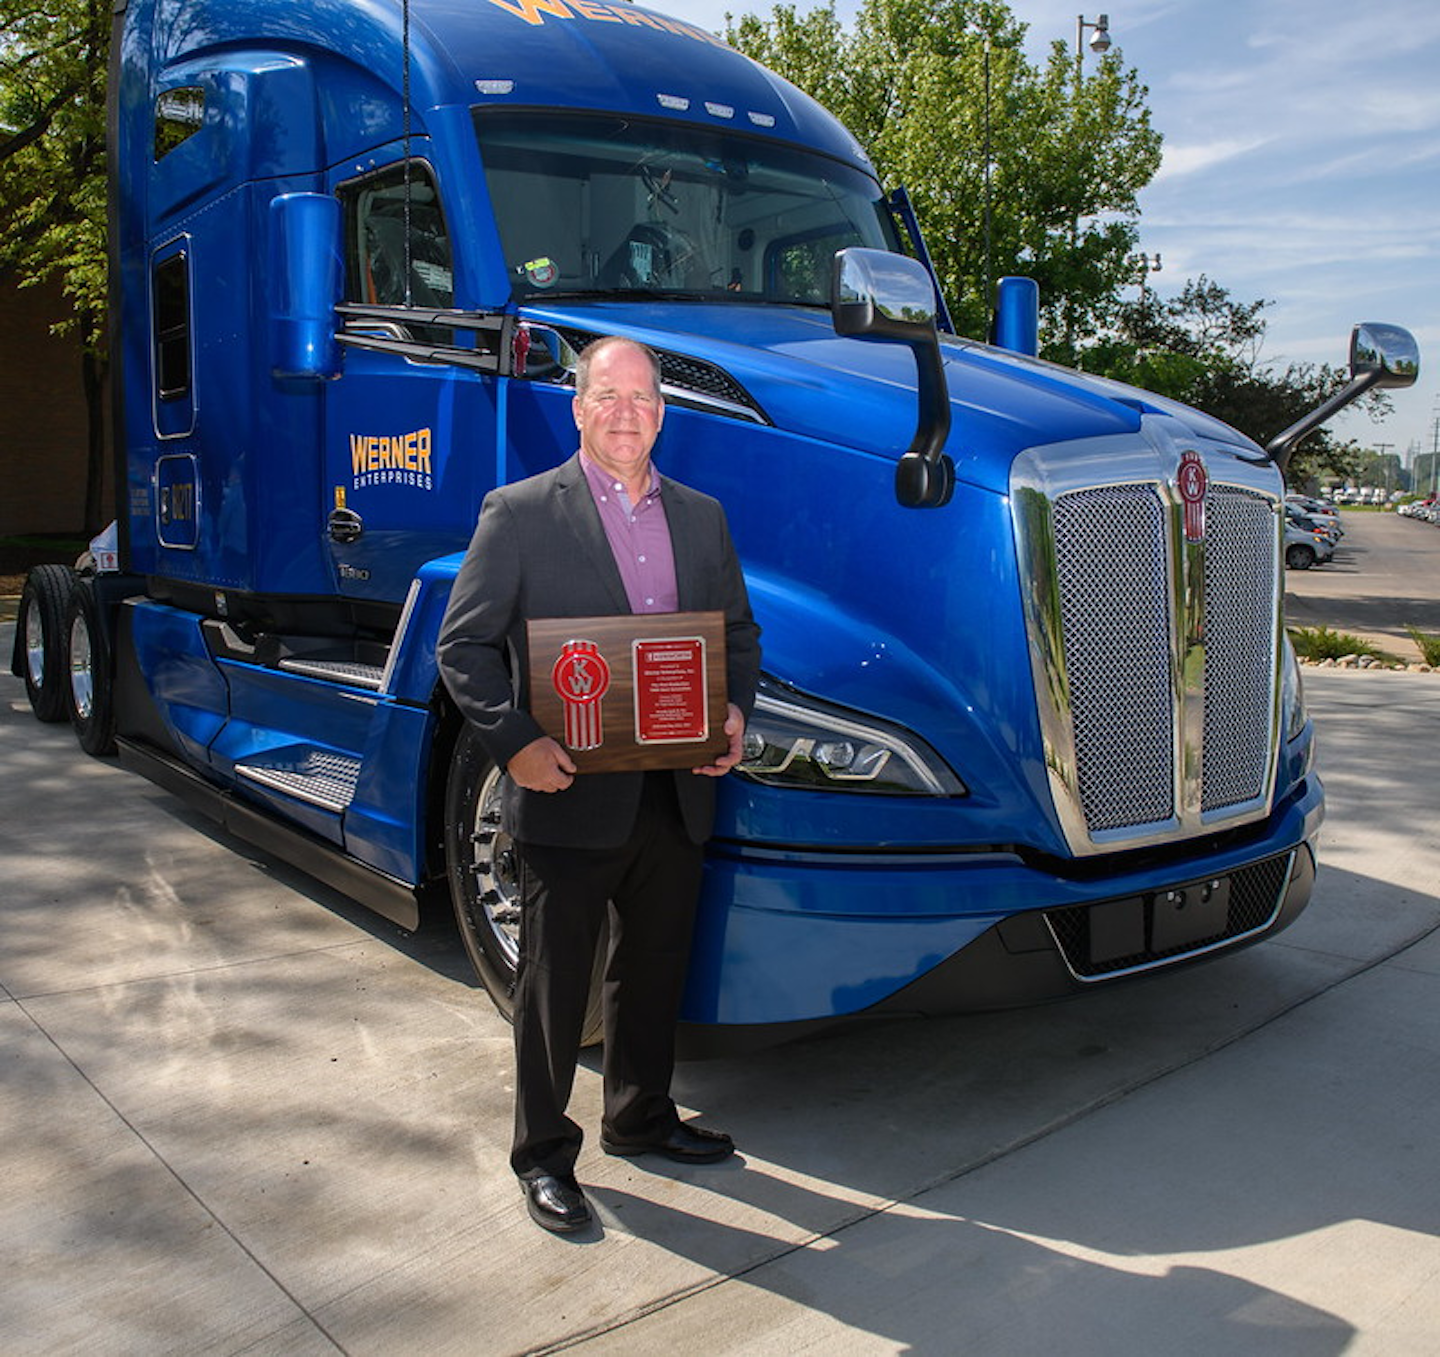 Scott Reed, Werner Enterprises senior vice president of equipment purchasing and maintenance, holds a plaque signifying the delivery of the first production Kenworth T680 Next Generation at the Kenworth plant in Chillicothe, Ohio.